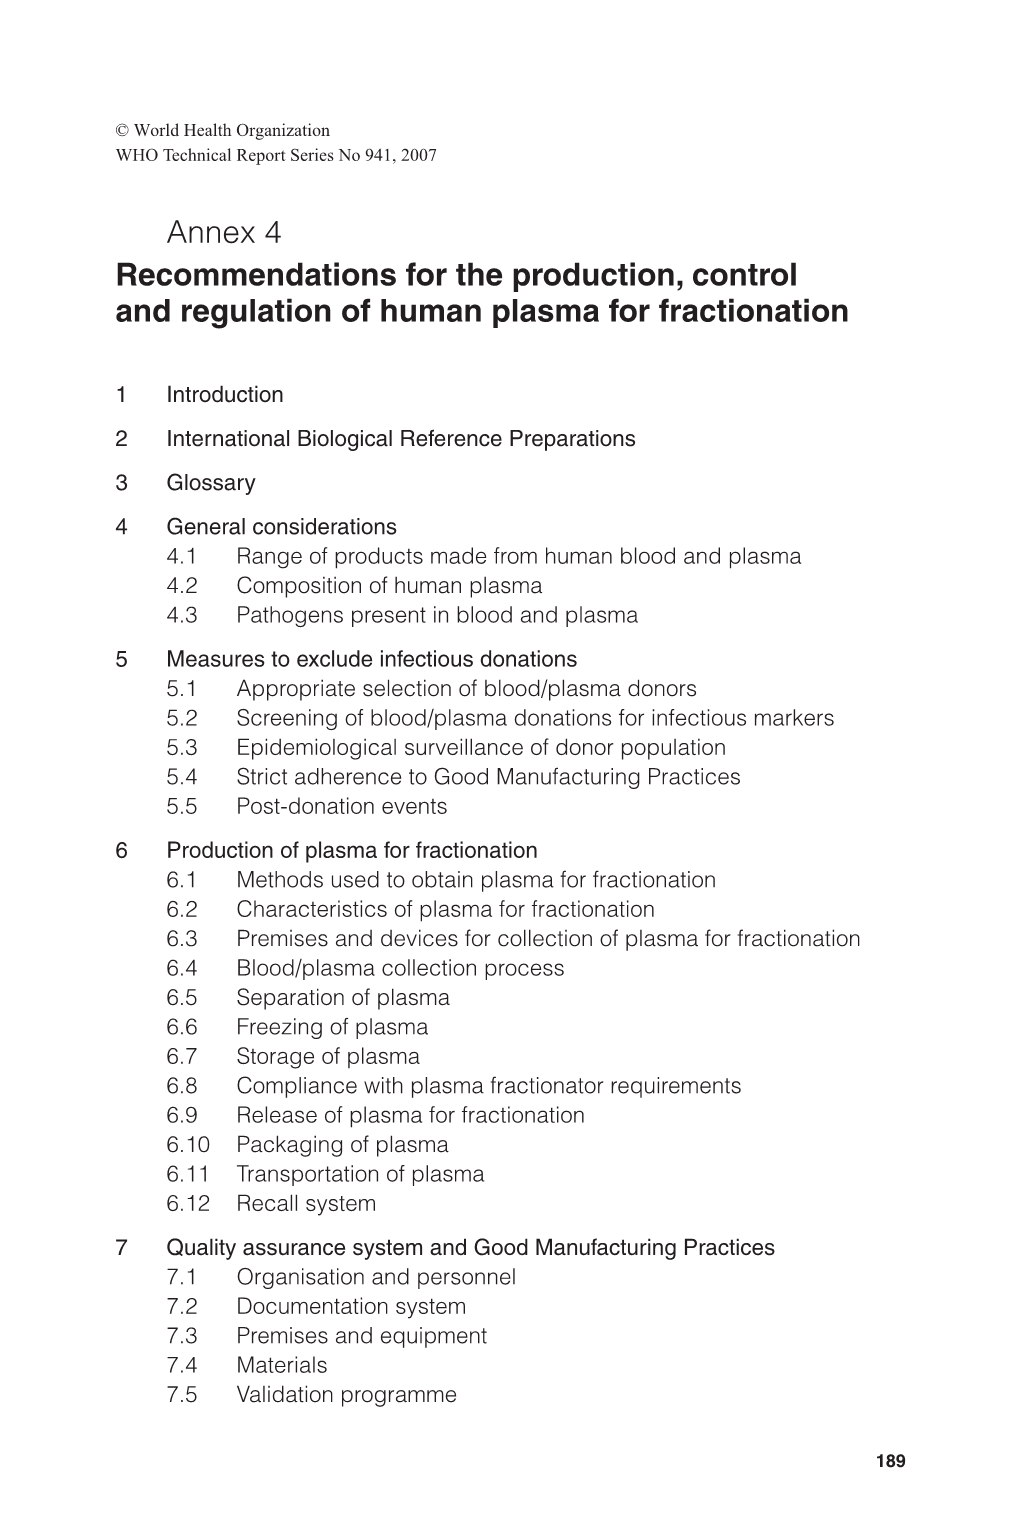 Annex 4 Recommendations for the Production, Control and Regulation of Human Plasma for Fractionation